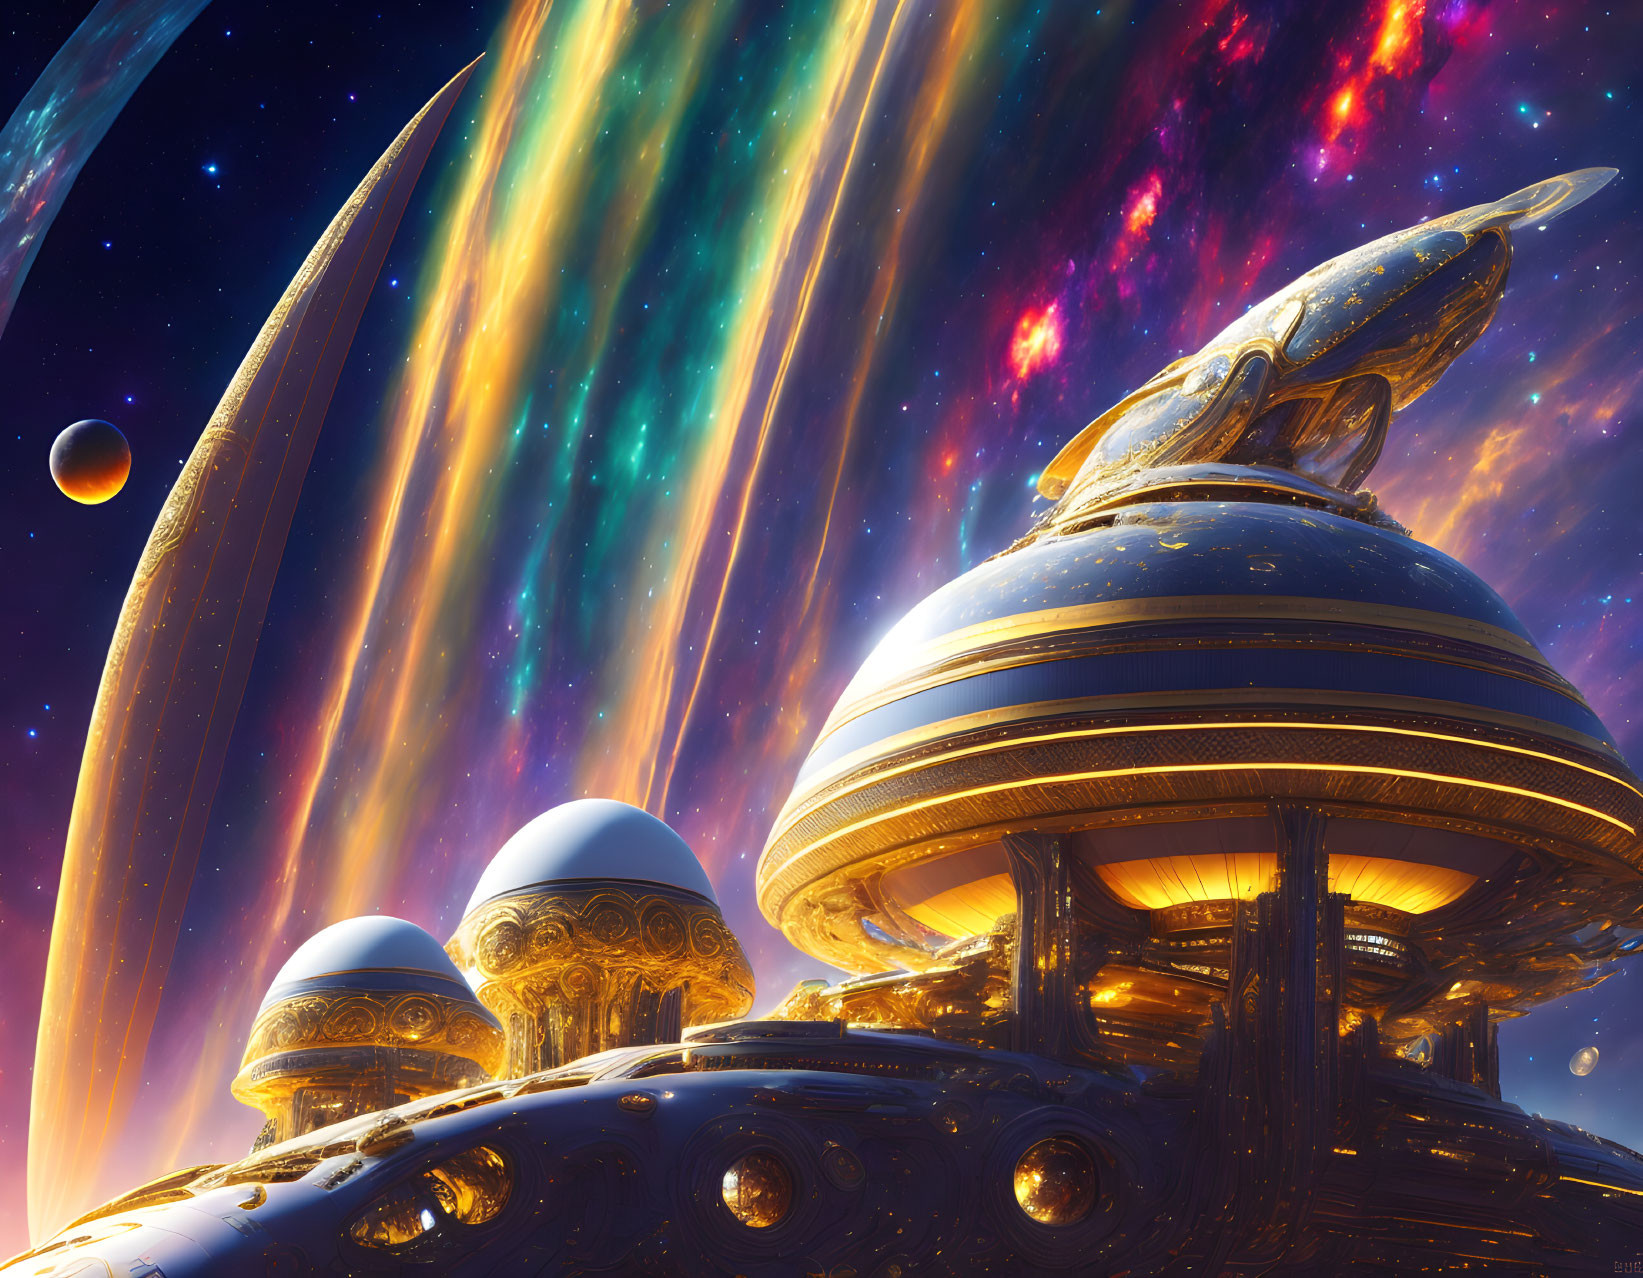 Futuristic space station with domes in cosmic backdrop